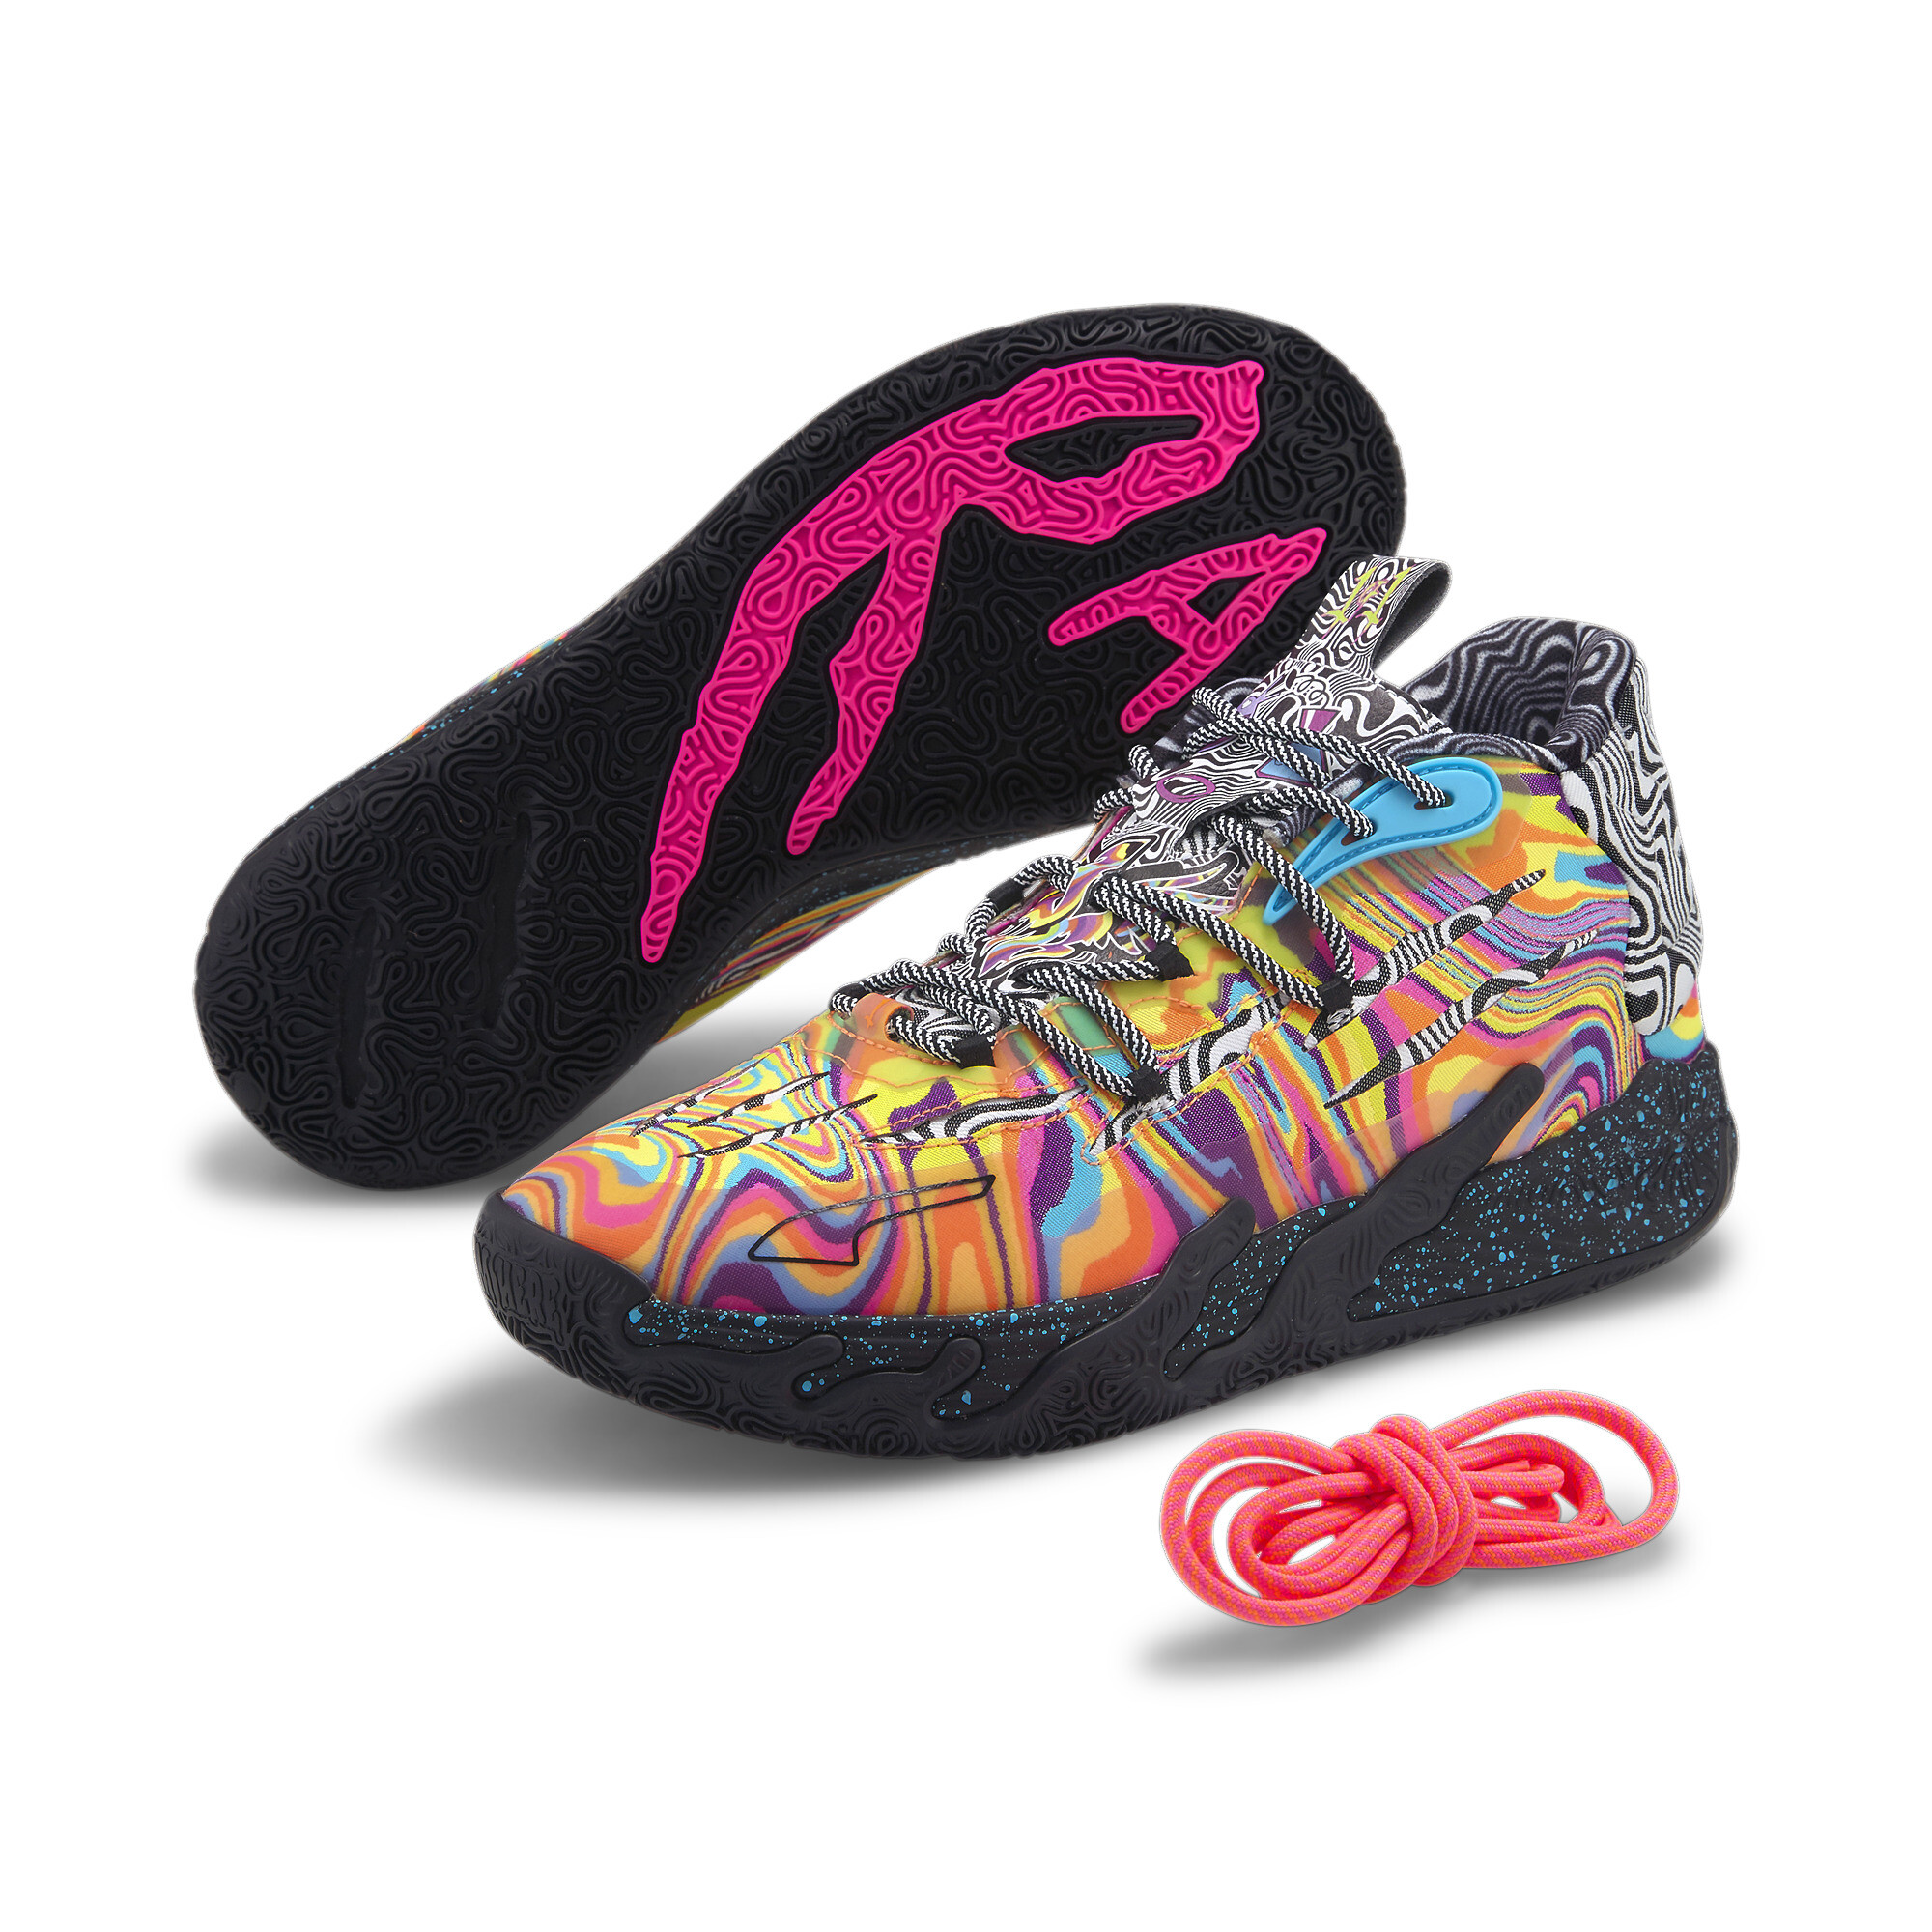 Puma MB.03 Dexter's Laboratory Basketball Shoes, Pink, Size 41, Shoes